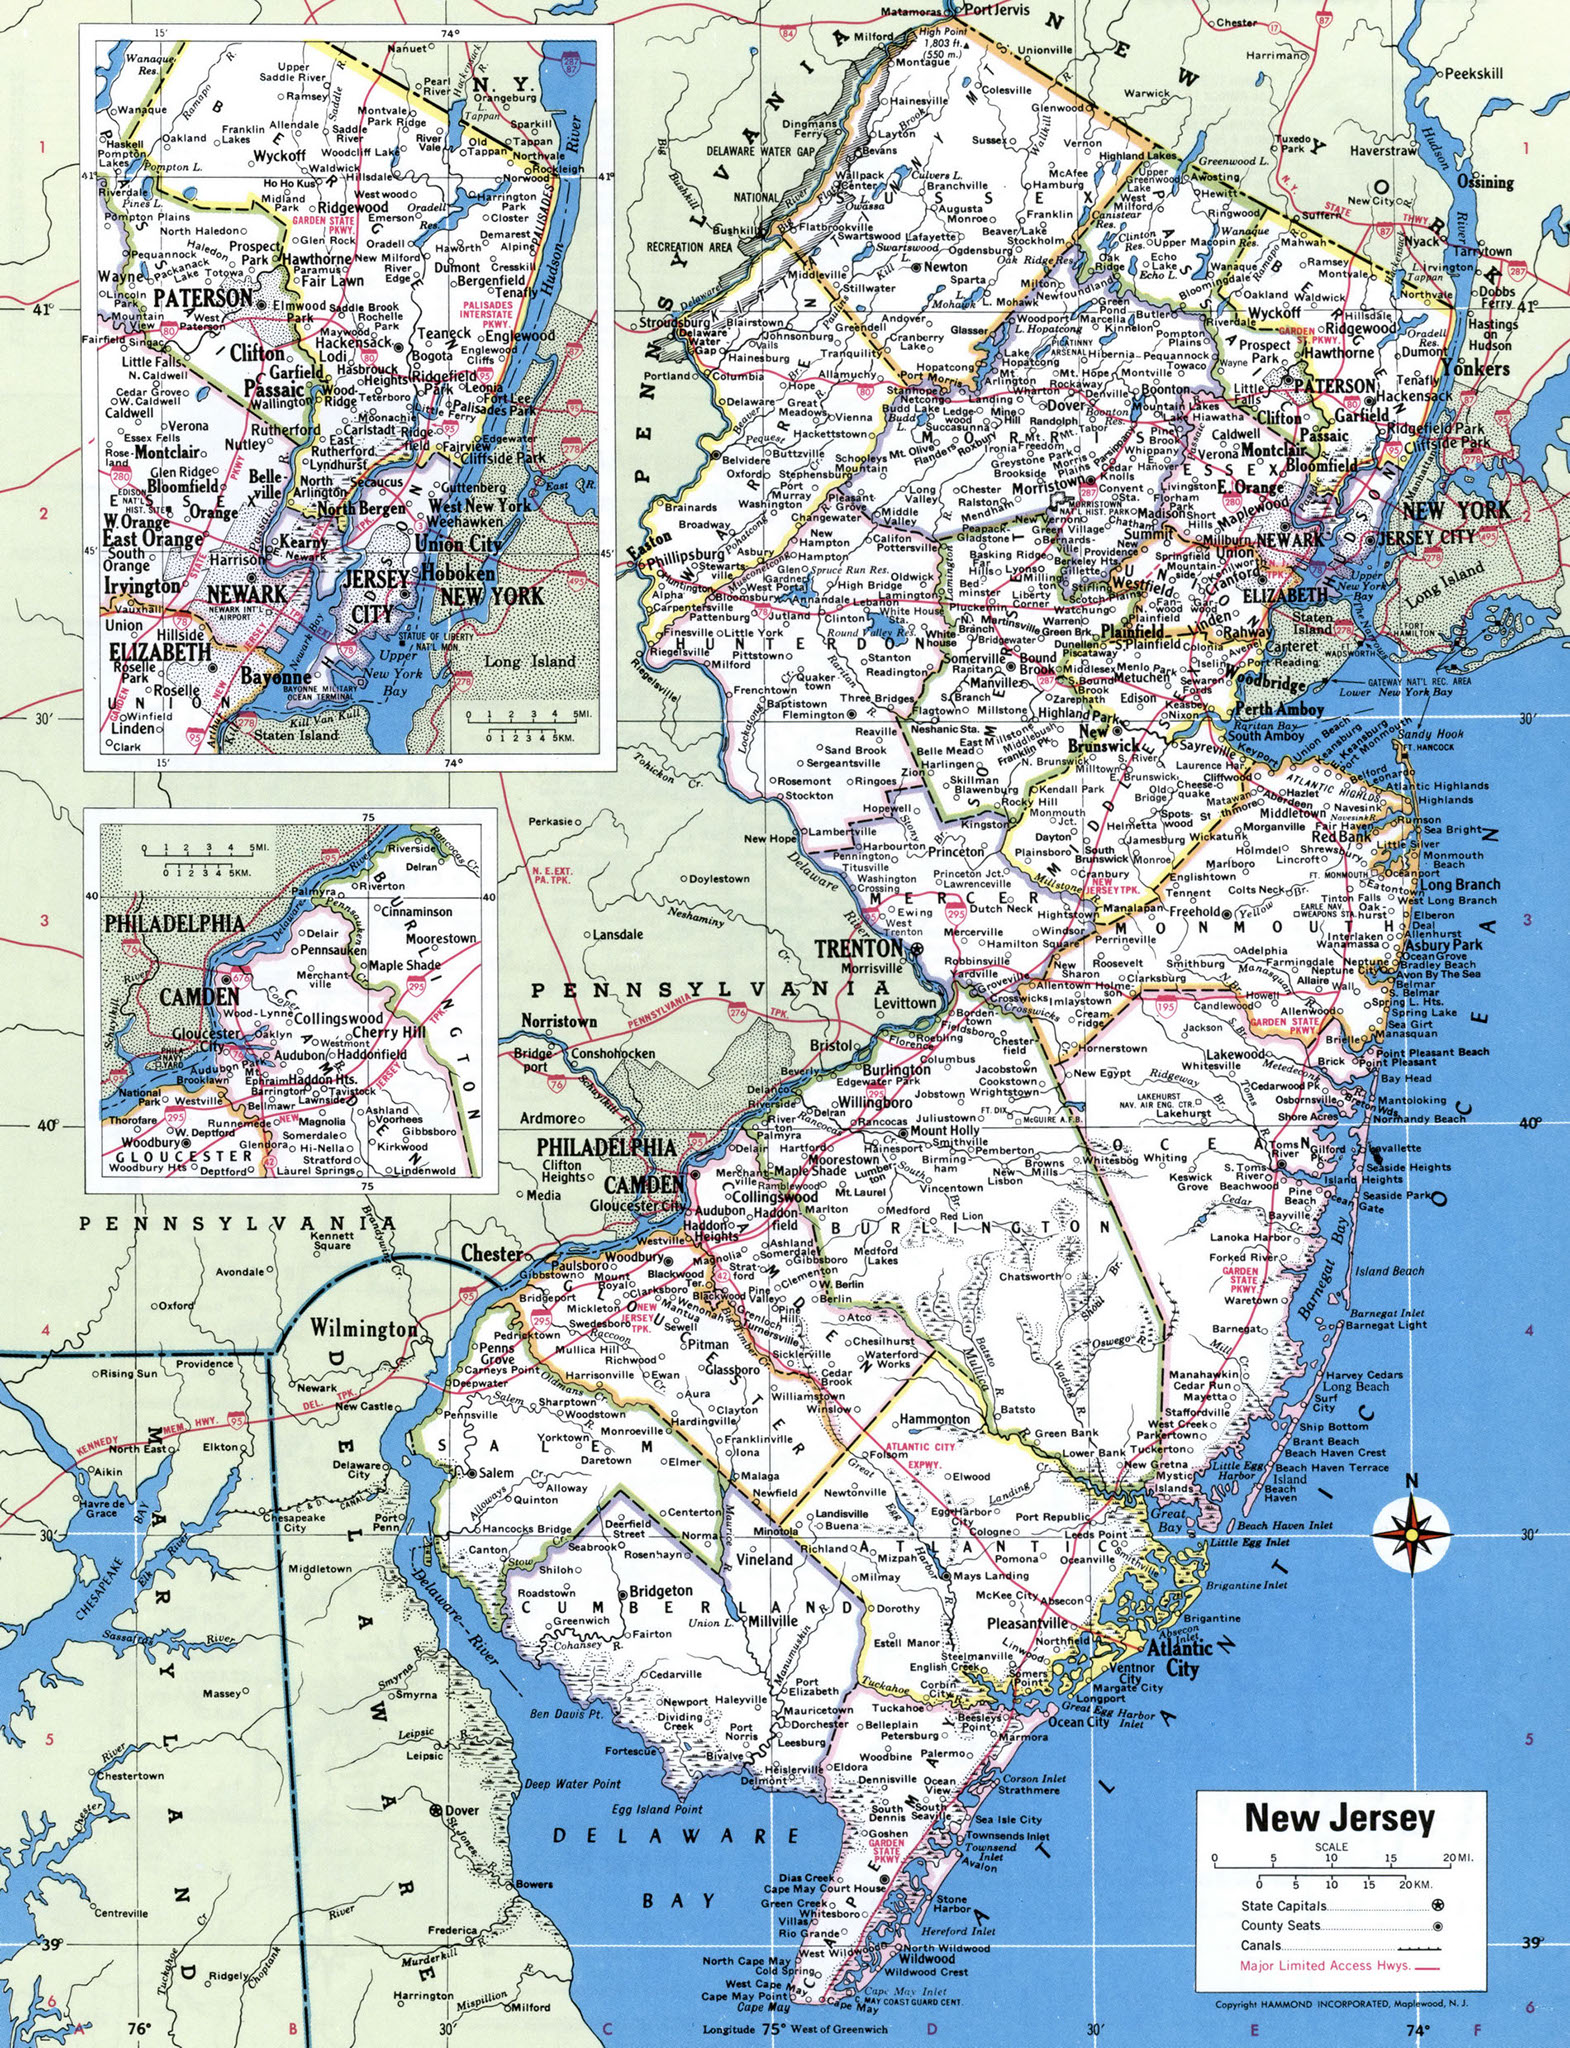 Map of New Jersey by county